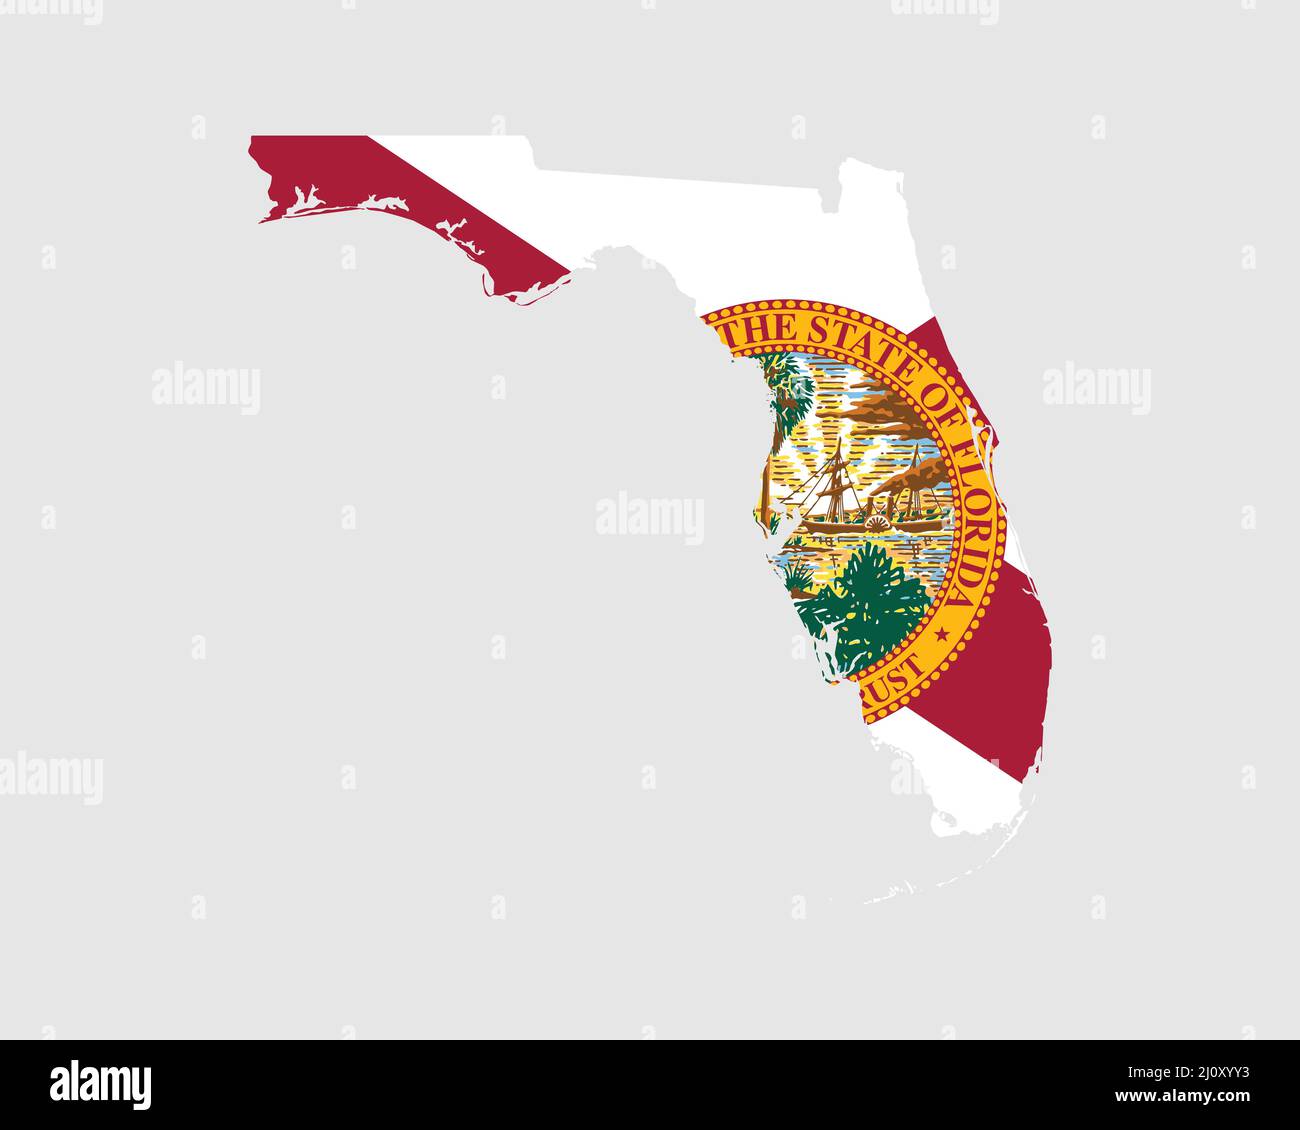 Florida Map Flag. Map of FL, USA with the state flag. United States, America, American, United States of America, US State Banner. Vector illustration Stock Vector